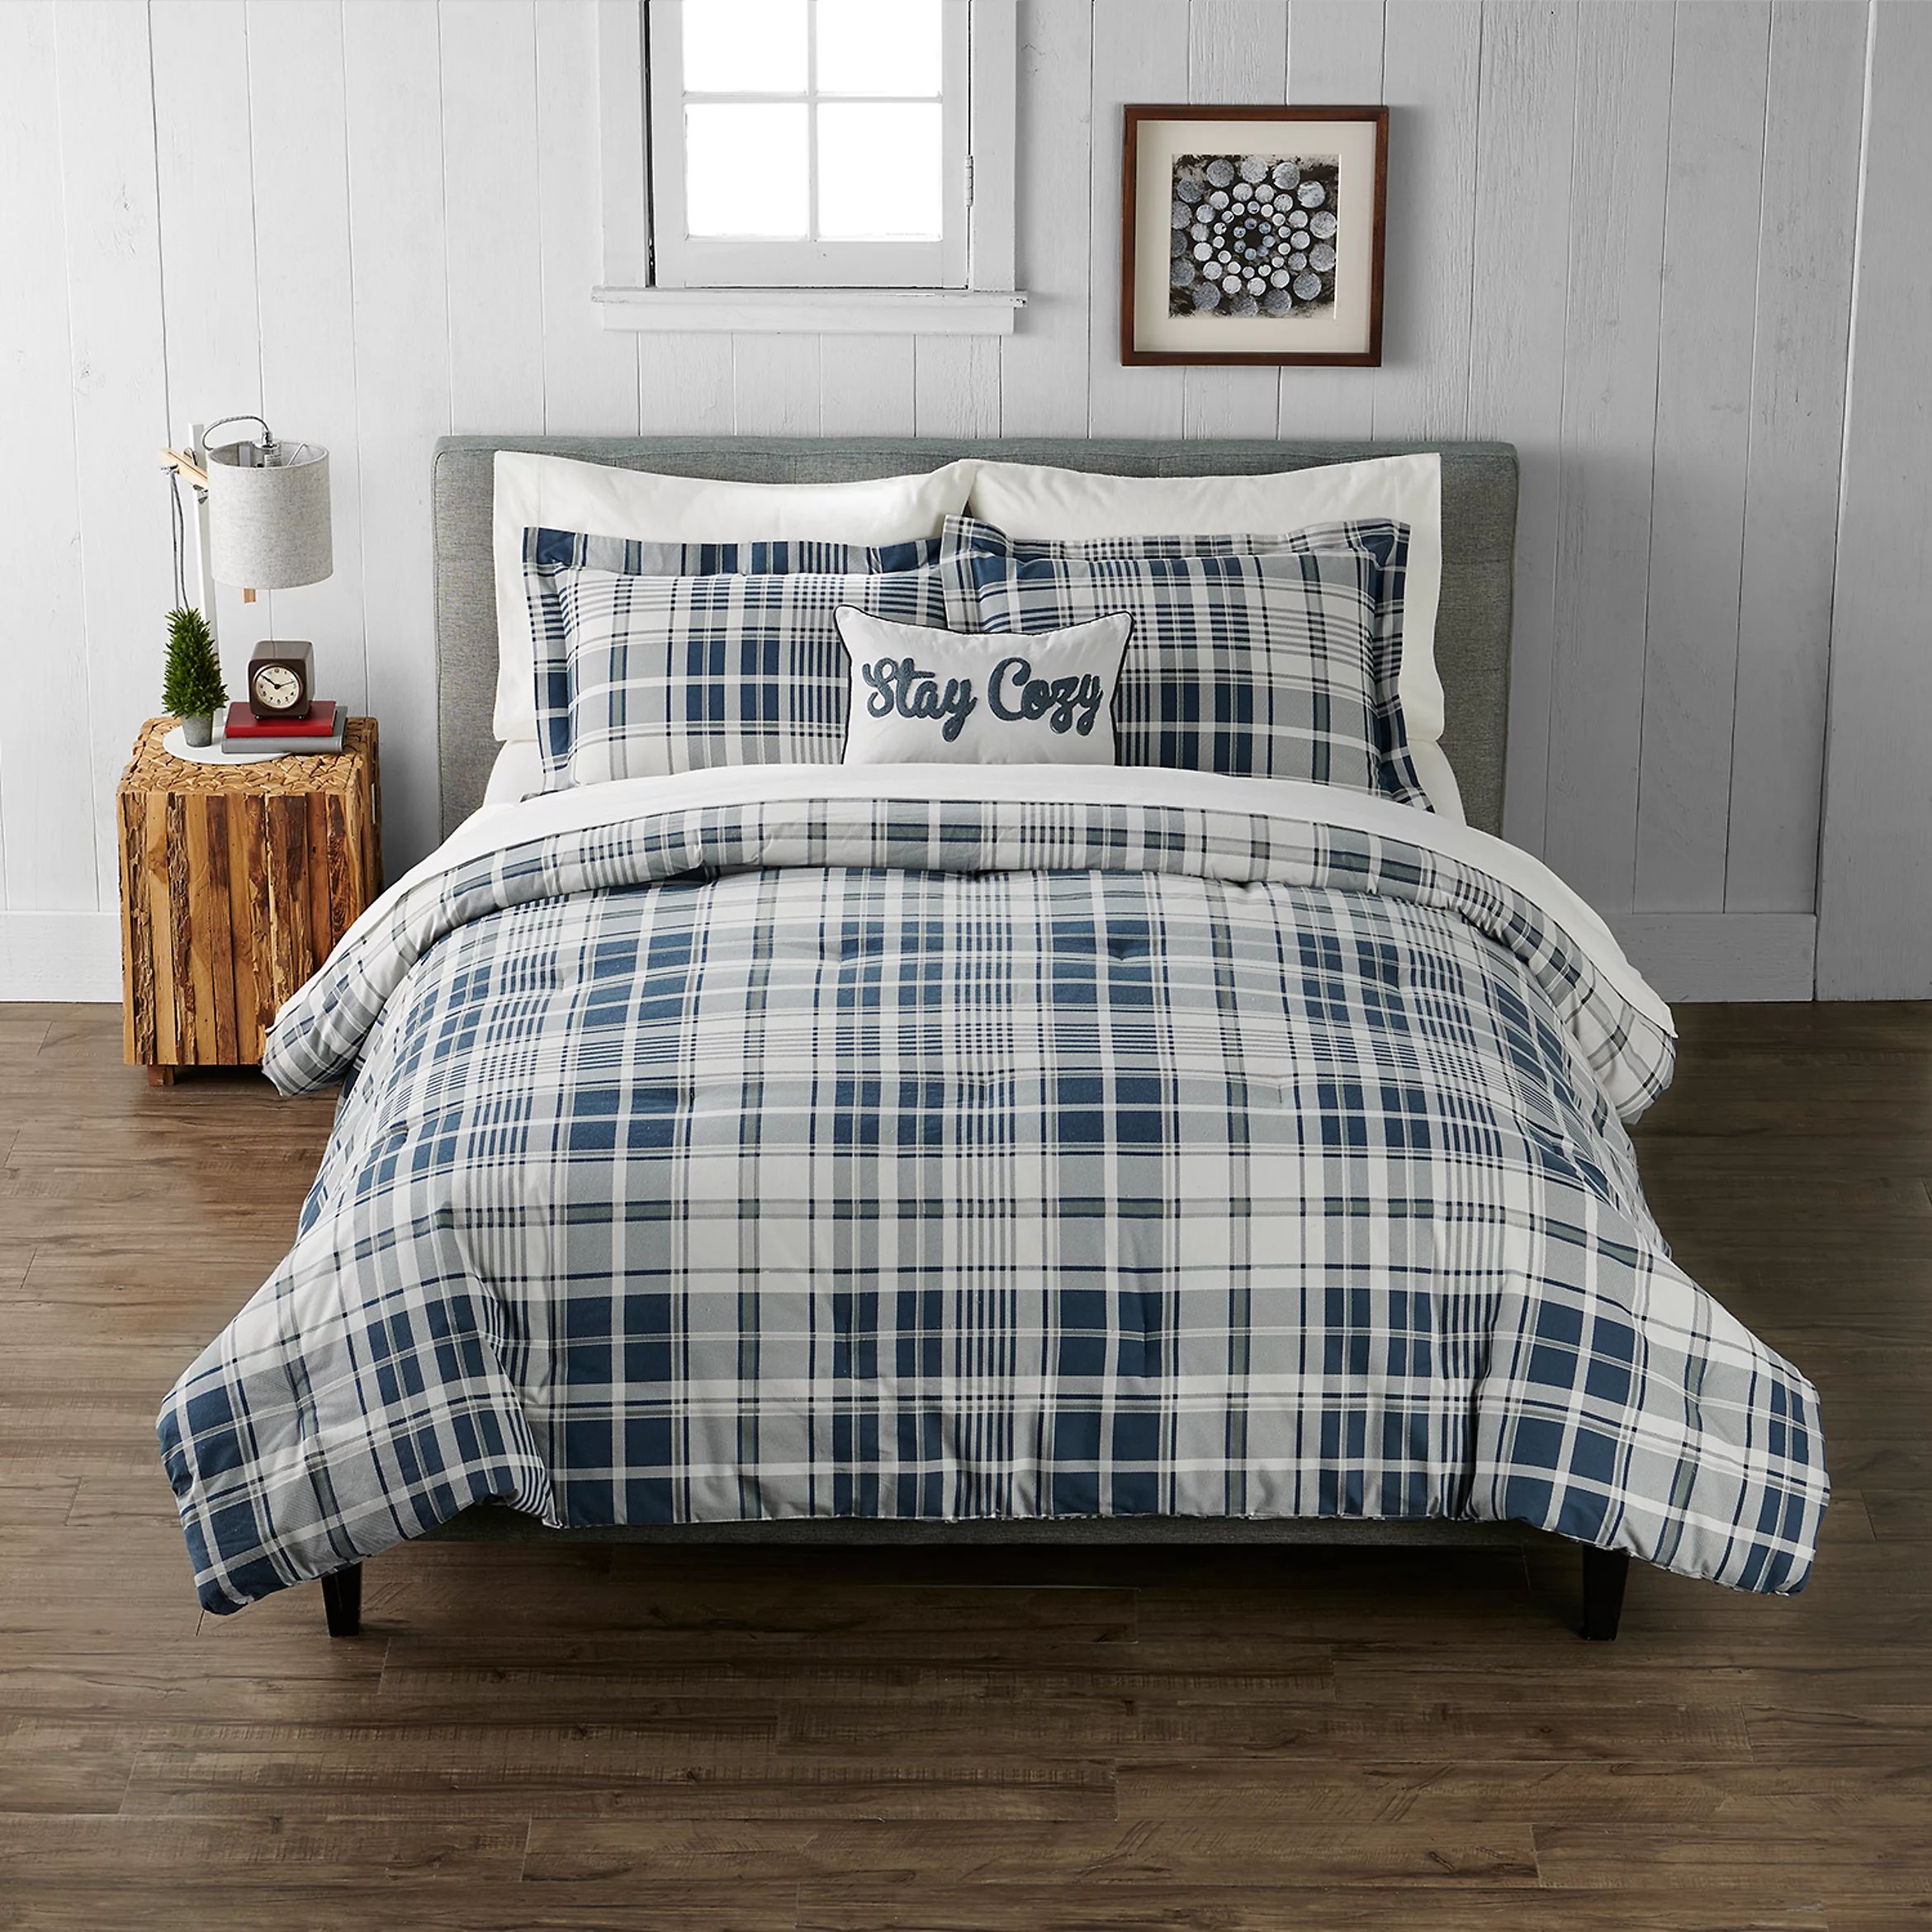 Cuddl Duds® Navy Gray Plaid Heavyweight Flannel Comforter Set with Coordinating Pillow | Kohl's